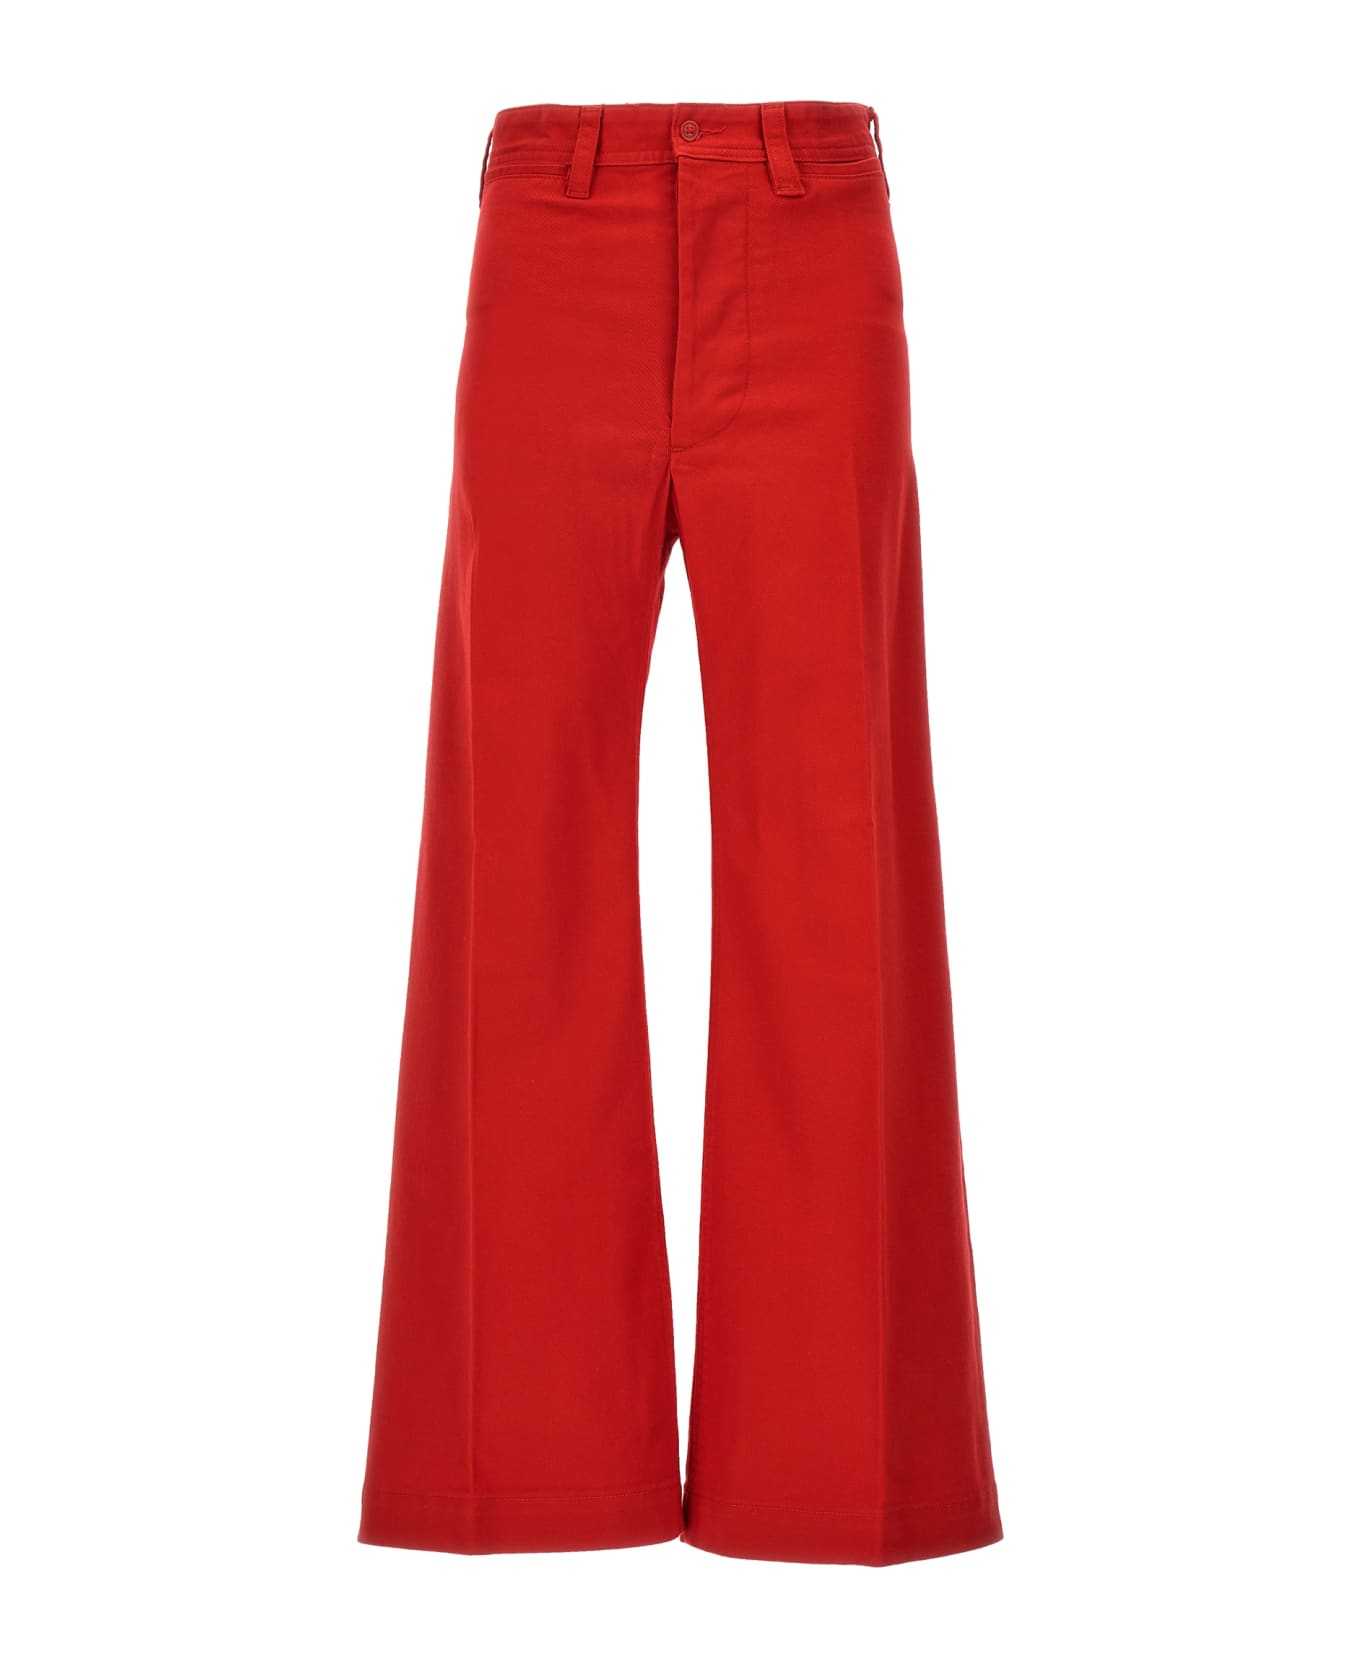 Polo Ralph Lauren Flared Pants - Red ボトムス